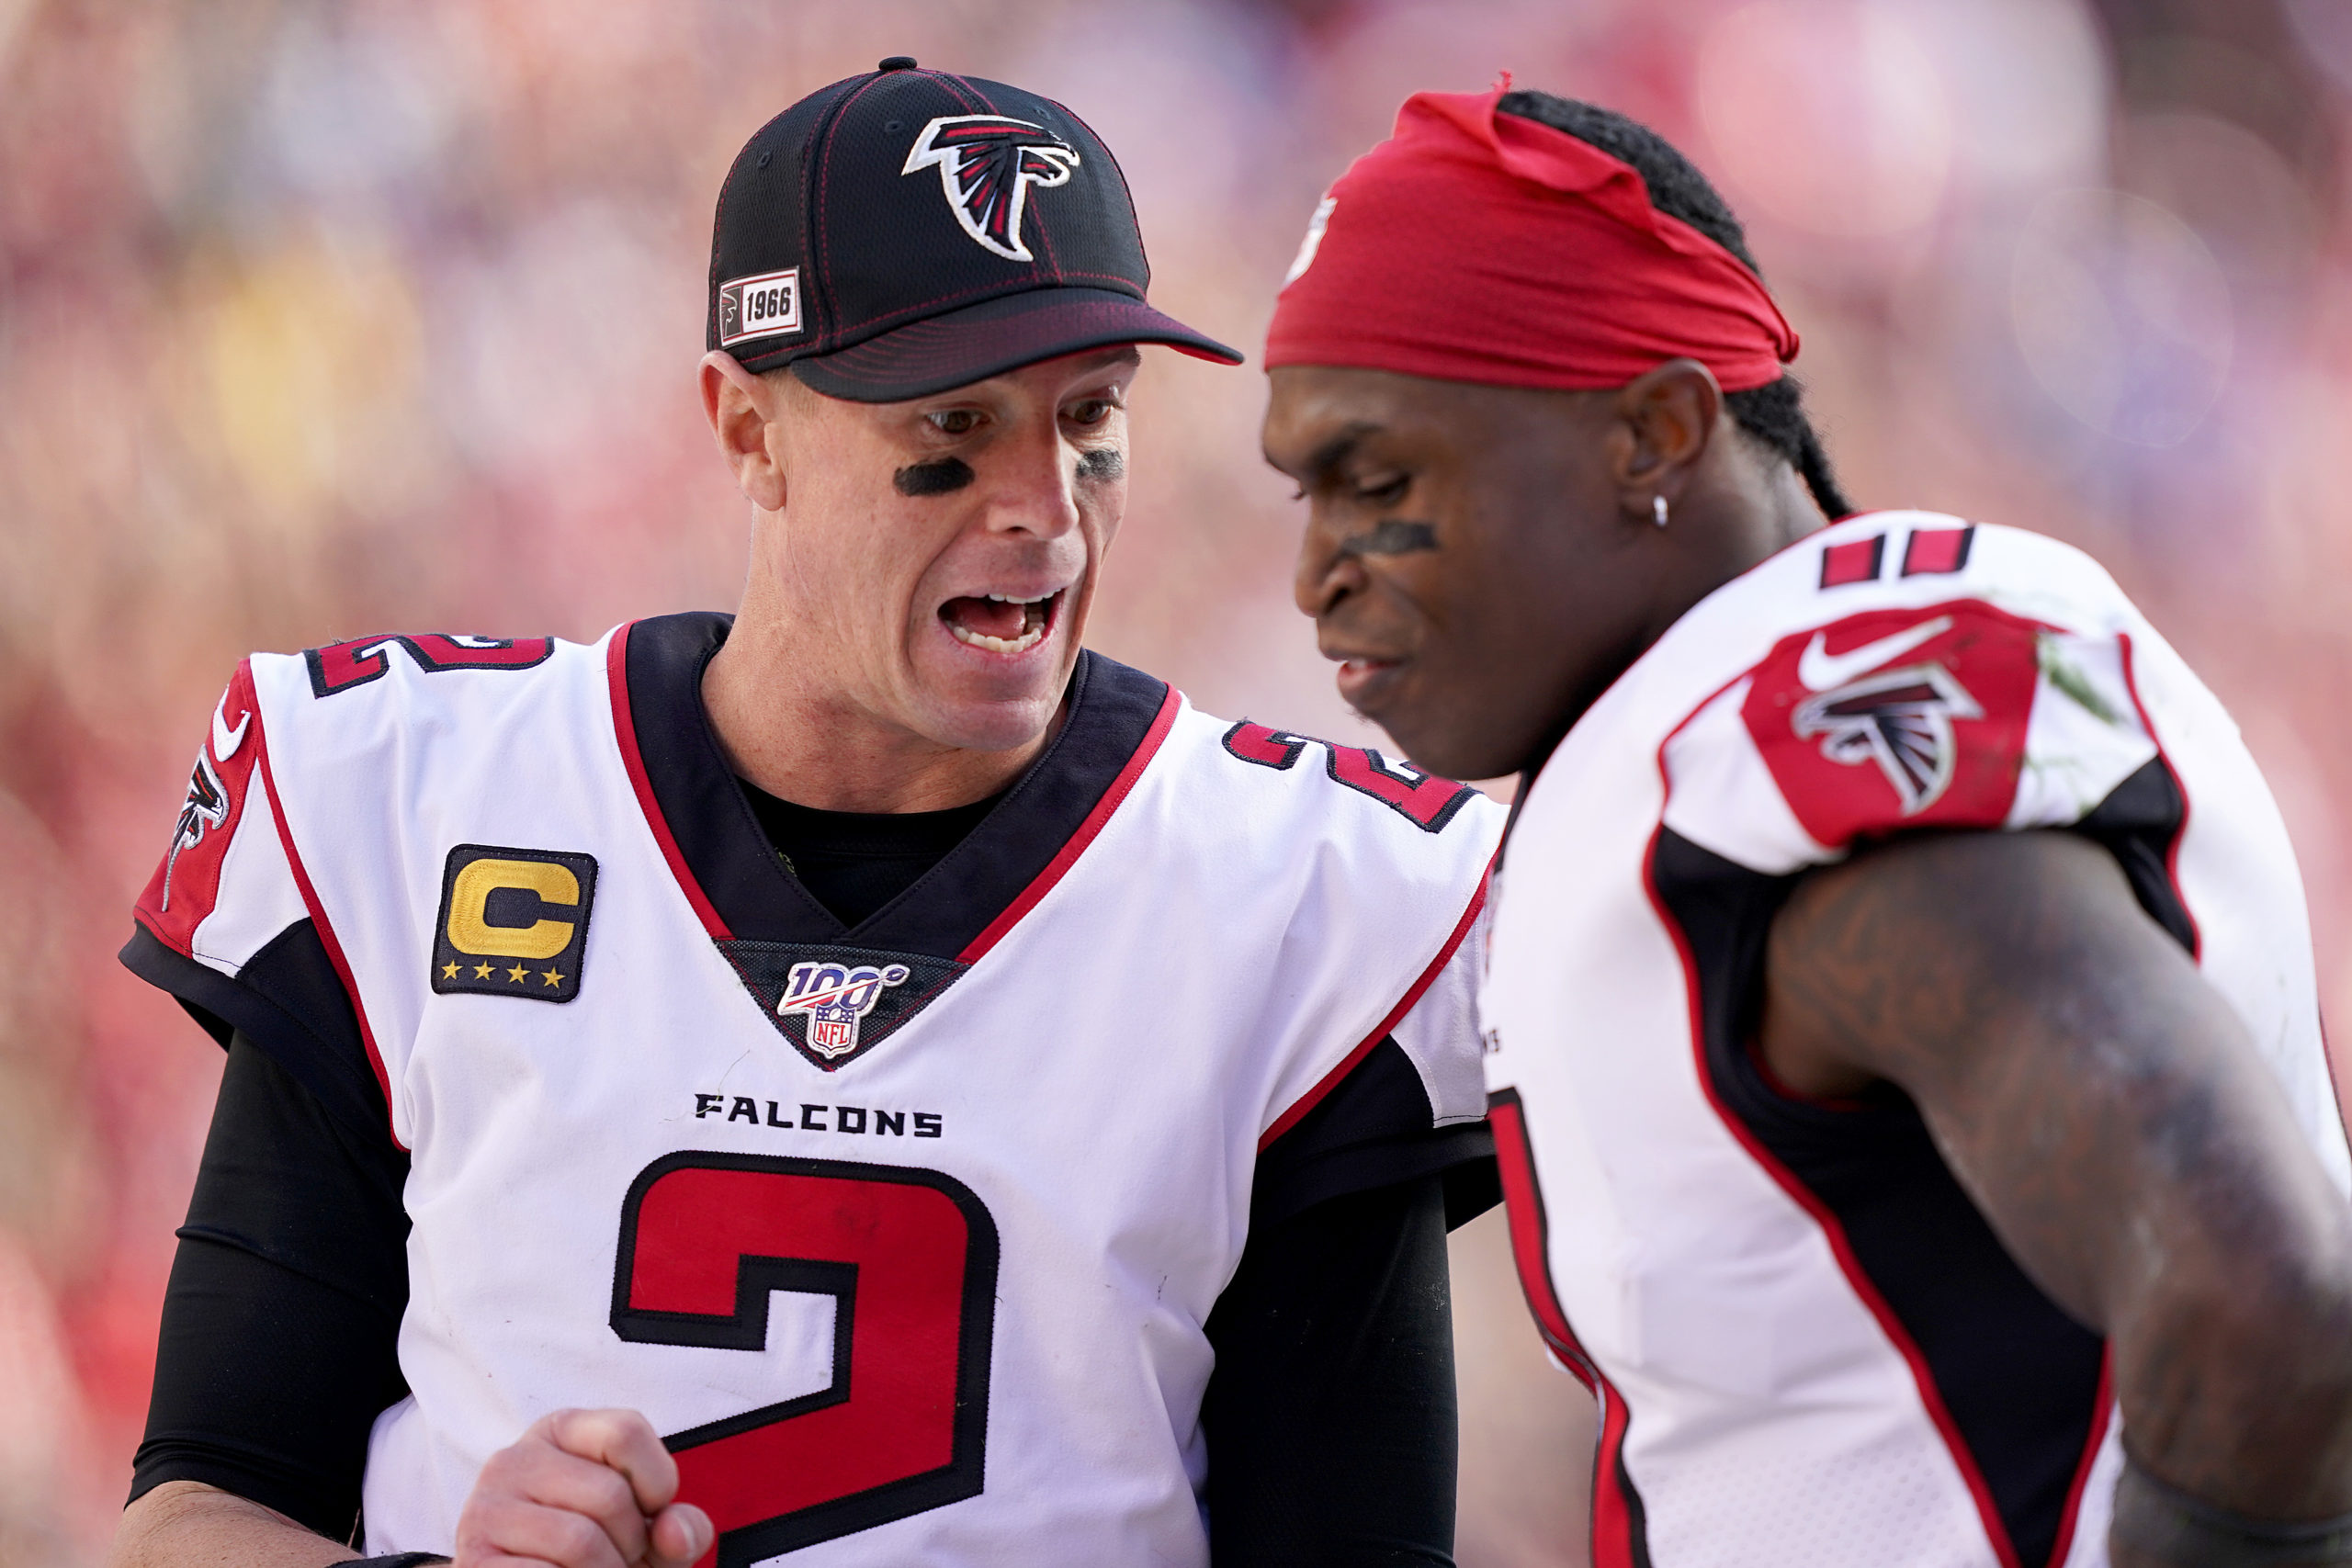 SANTA CLARA, CALIFORNIA - DECEMBER 15: Quarterback Matt Ryan #2 and wide receiver Julio Jones #11 of the Atlanta Falcons talk on the sidlines during the game against the San Francisco 49ers at Levi's Stadium on December 15, 2019 in Santa Clara, California. Thearon W. Henderson/Getty Images